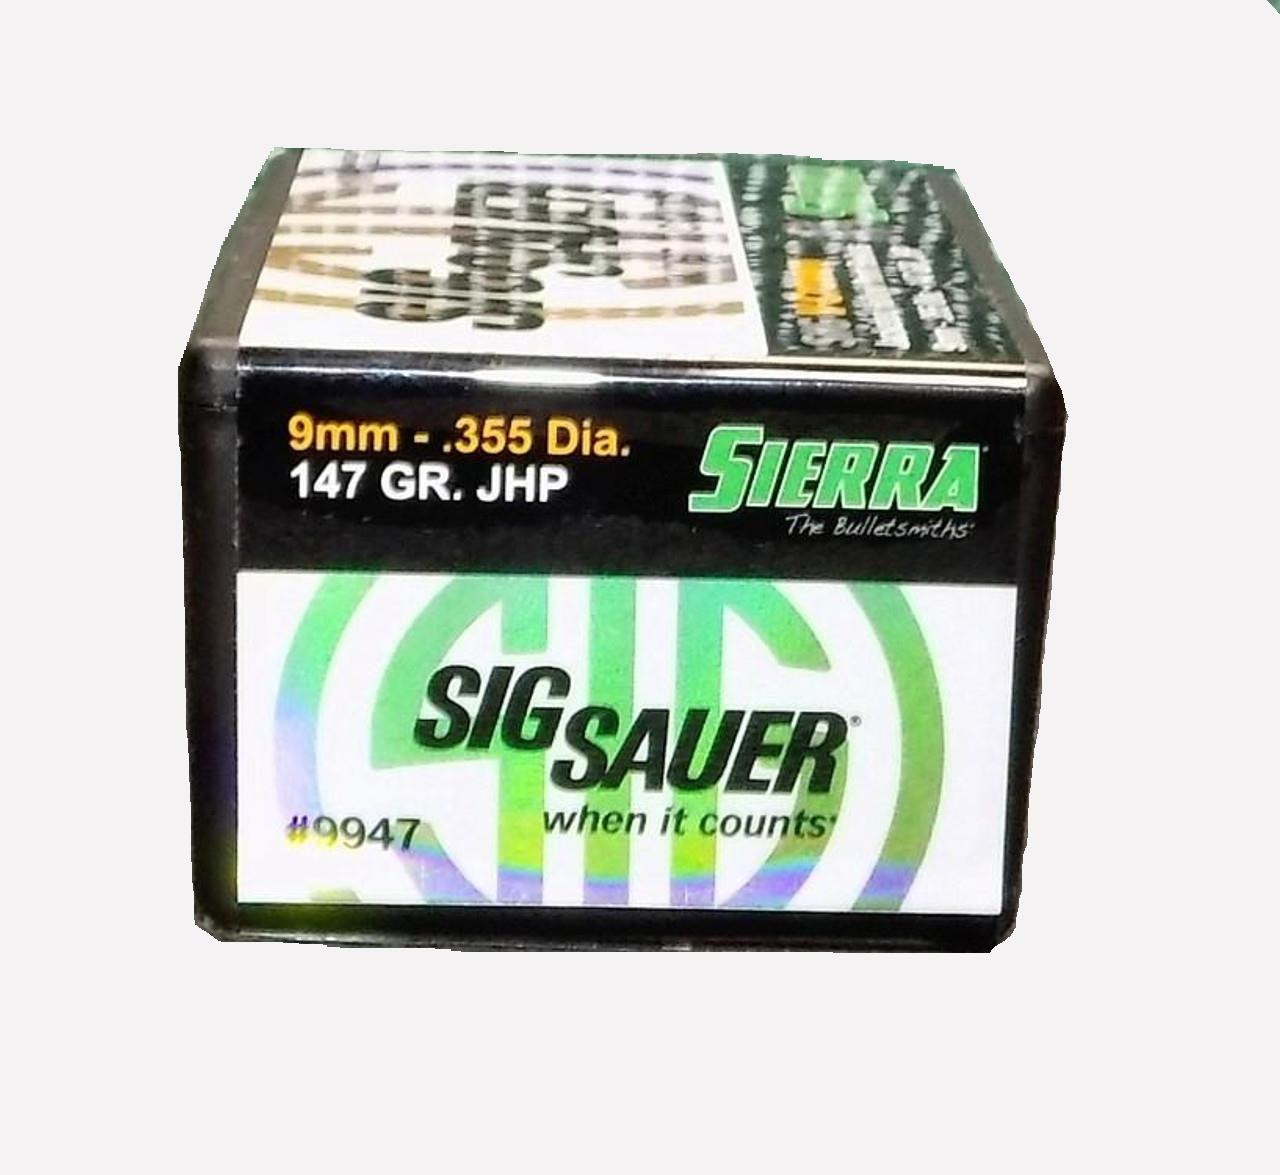 Sig Sauer Sierra 9MM 147Gr Jacketed Hollow Point Bullets #9947 (100ct Box)